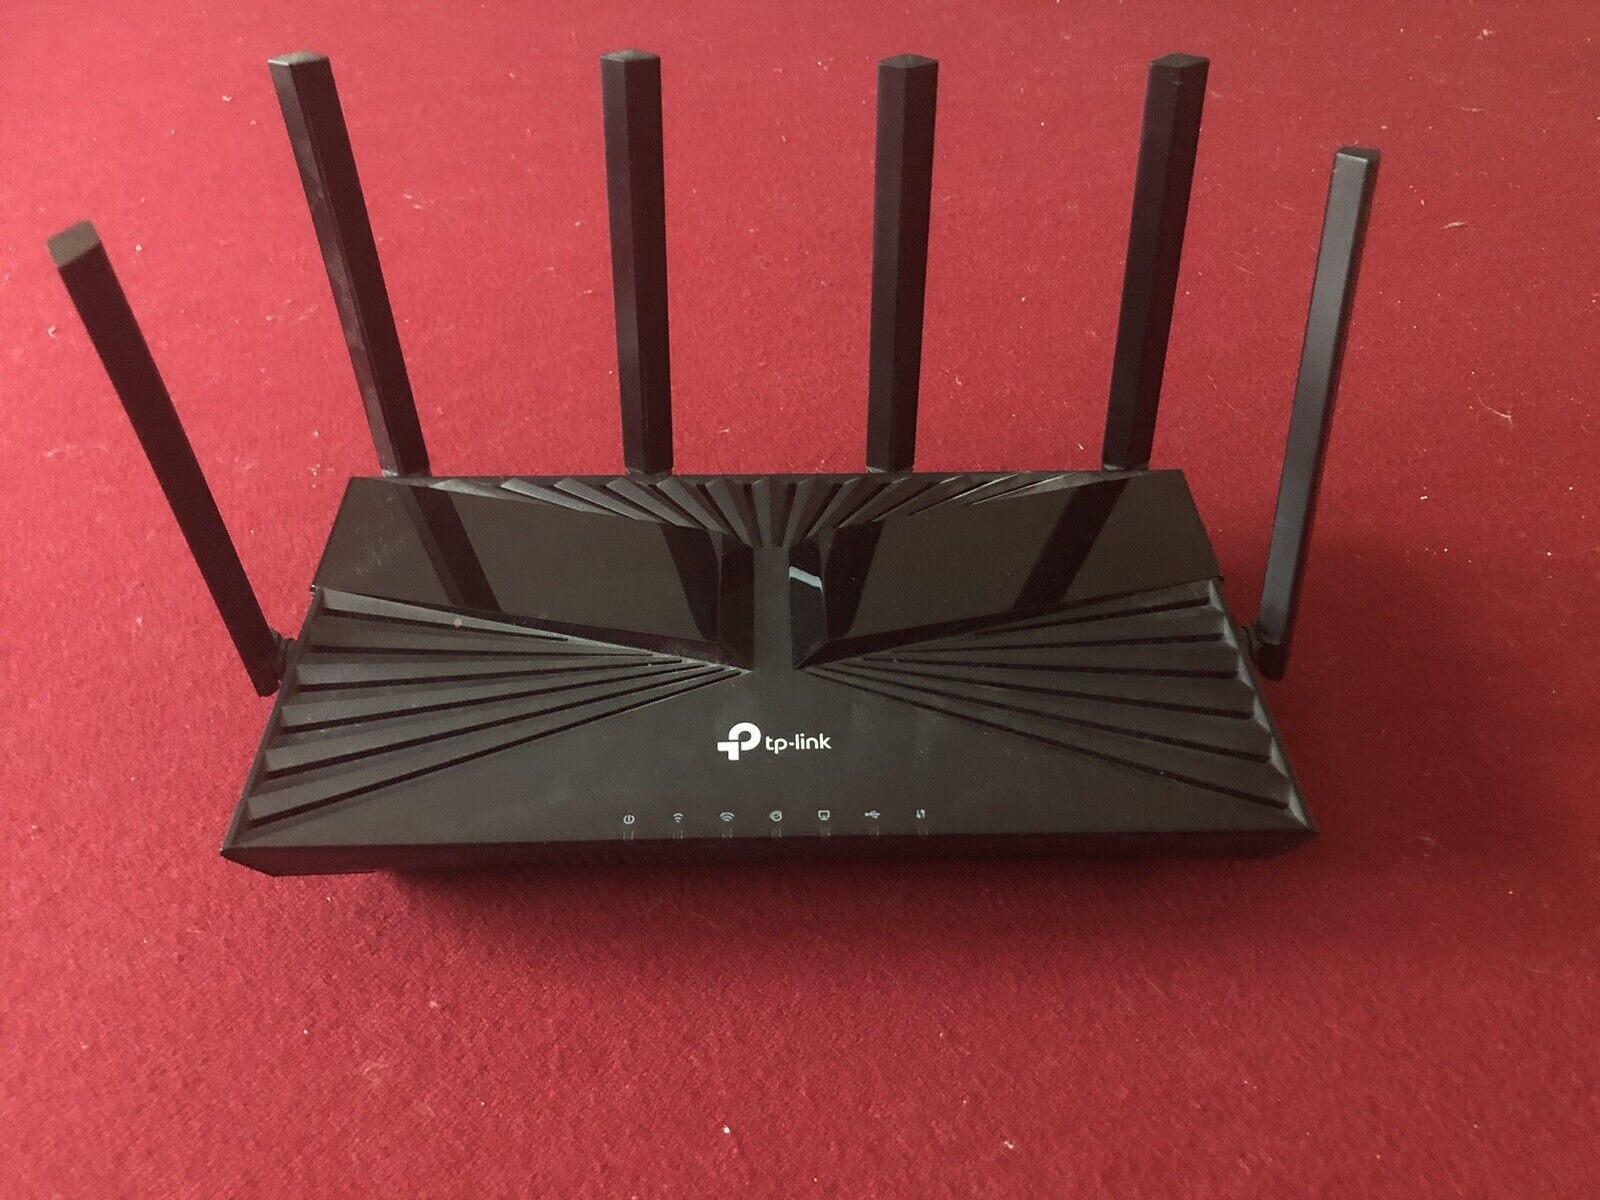 TP-Link 6-Stream Dual-Band WiFi 6 Wi-Fi Router | Archer AX4400 up to 4.4 Gbps